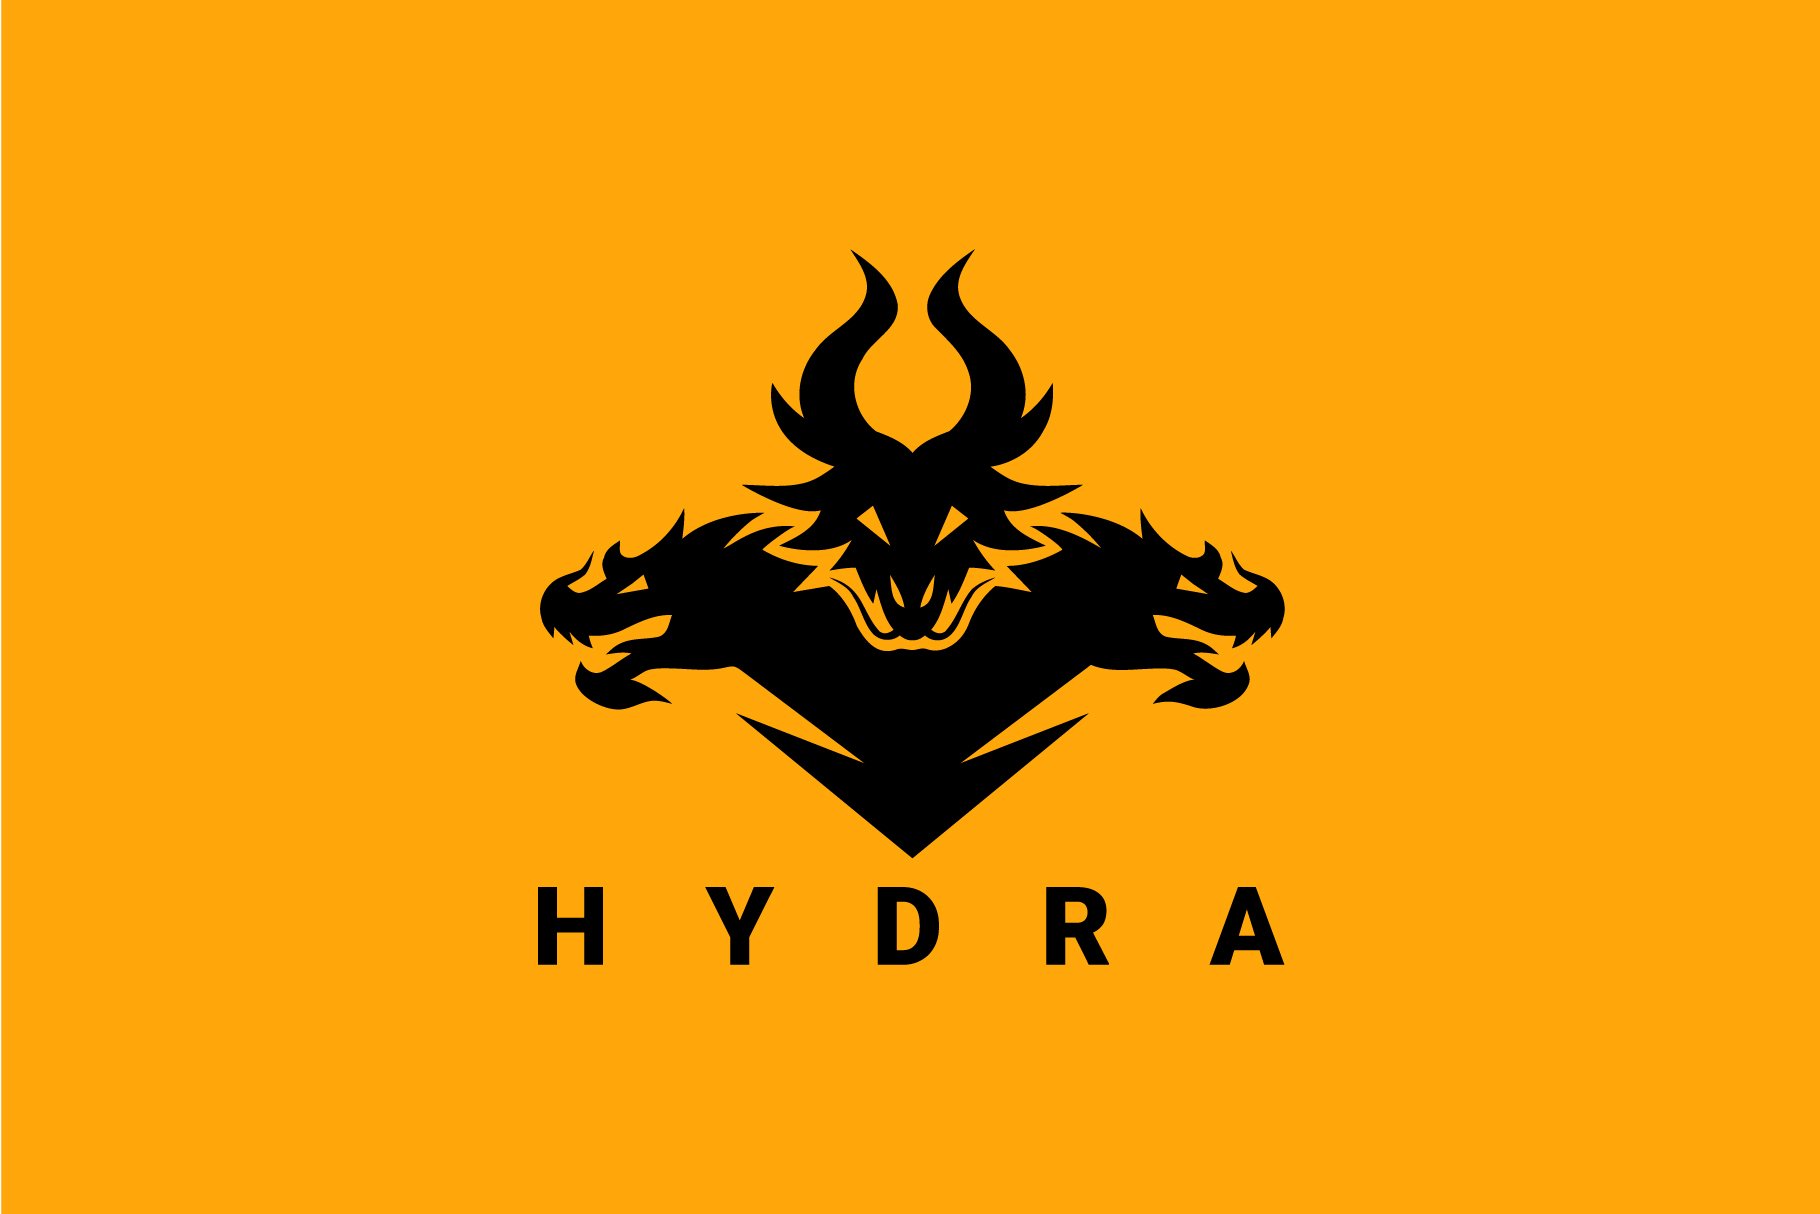 Hydra Heads Vintage Logo cover image.